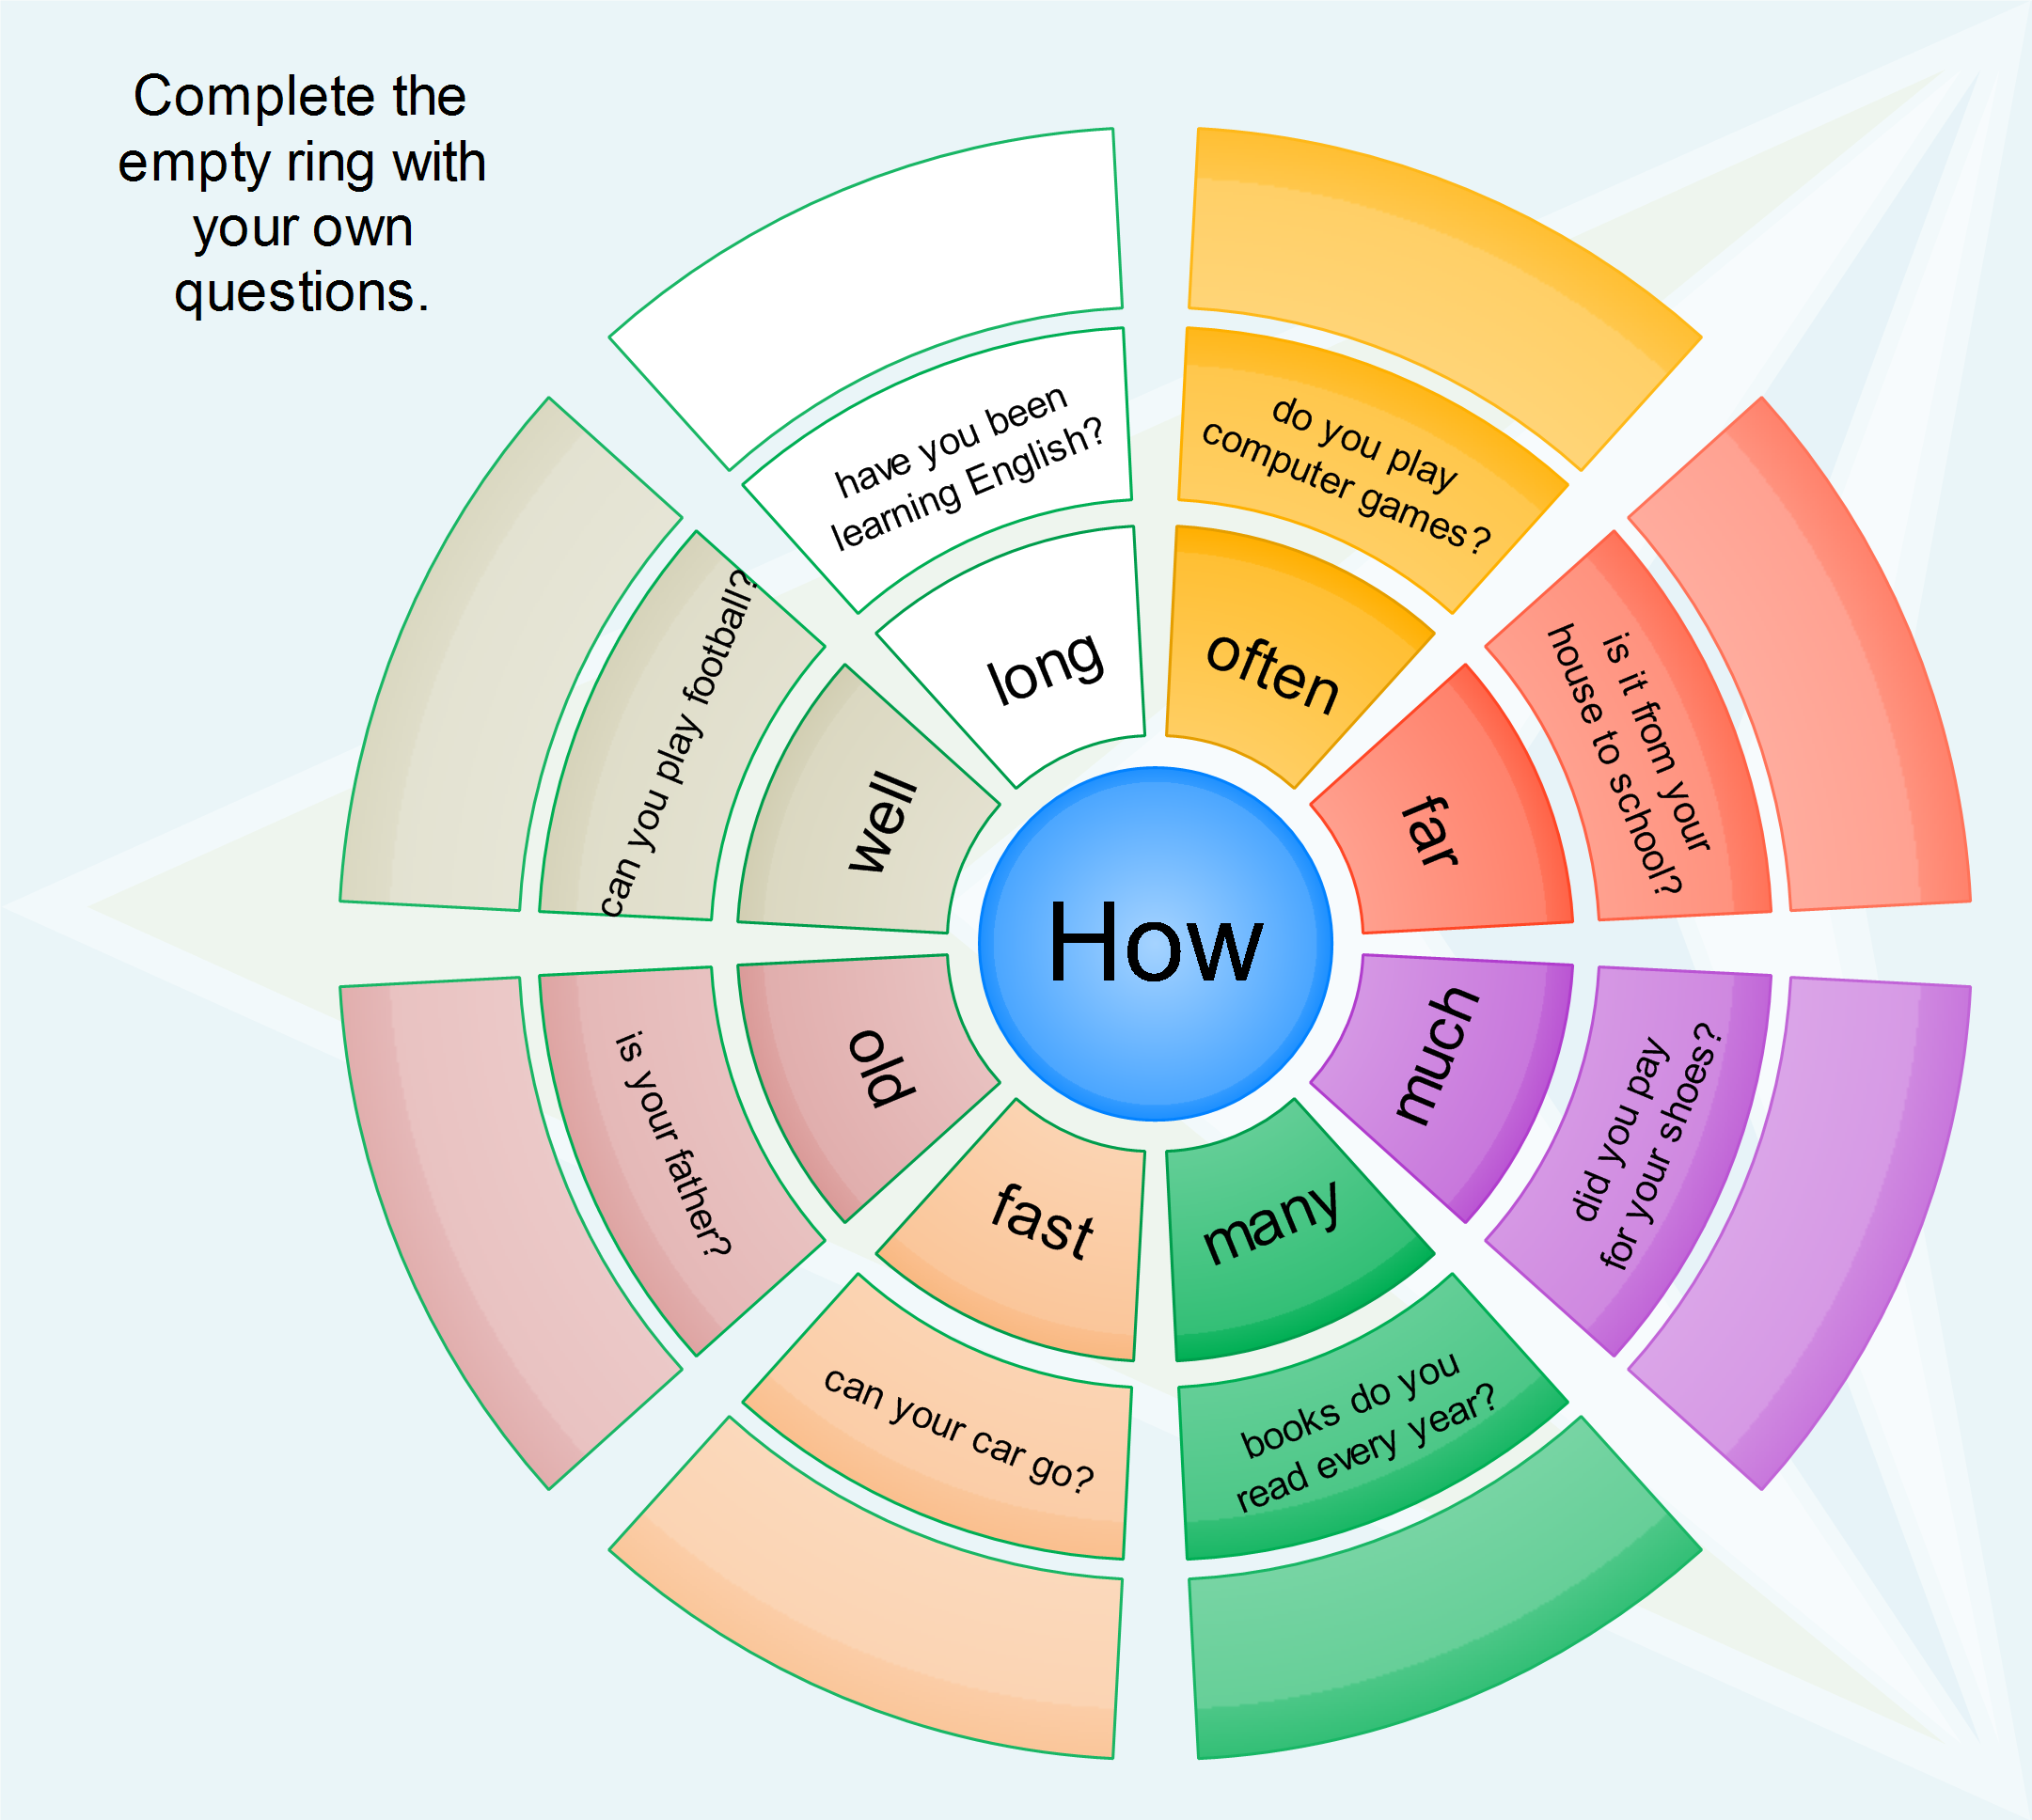 How questions mind map